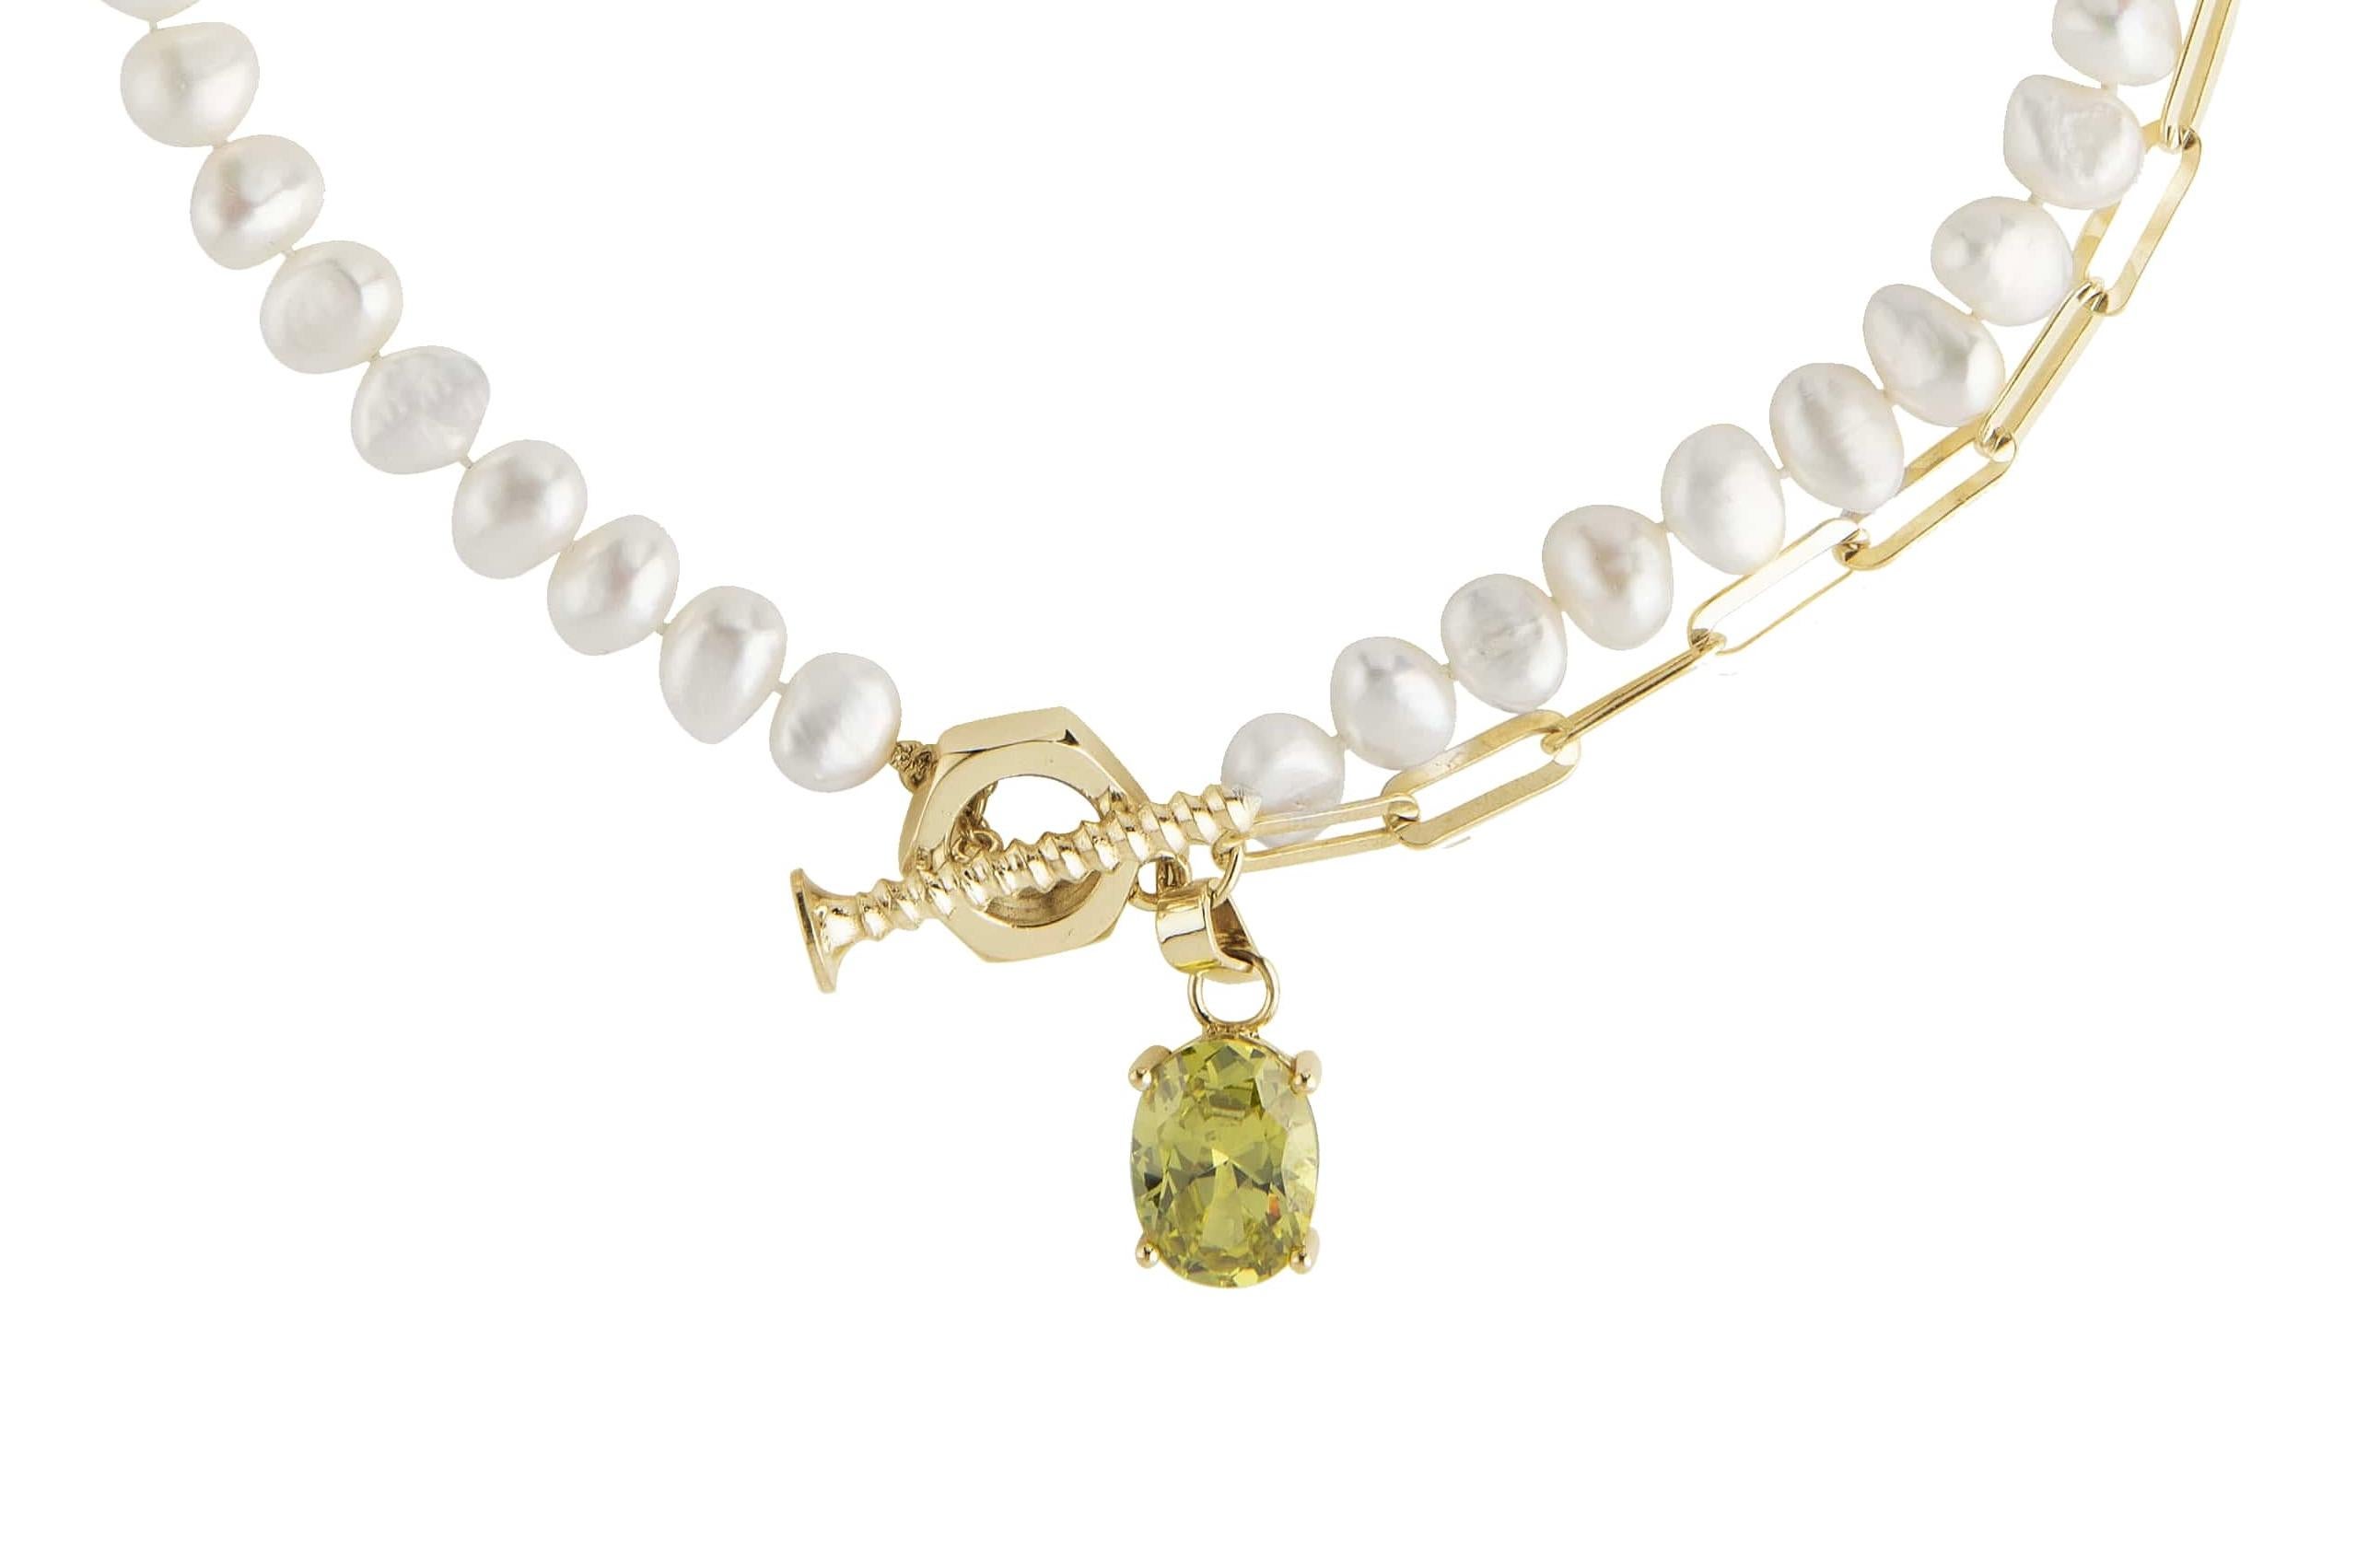 Baroque pearl necklace with a chain on the right side, a hanging big peridot crystal and Coalesce signature closure (formed by a hex nut and a screw).
Hand-finished jewelry with premium quality materials

Type of closure: Toggle.
Material: 925